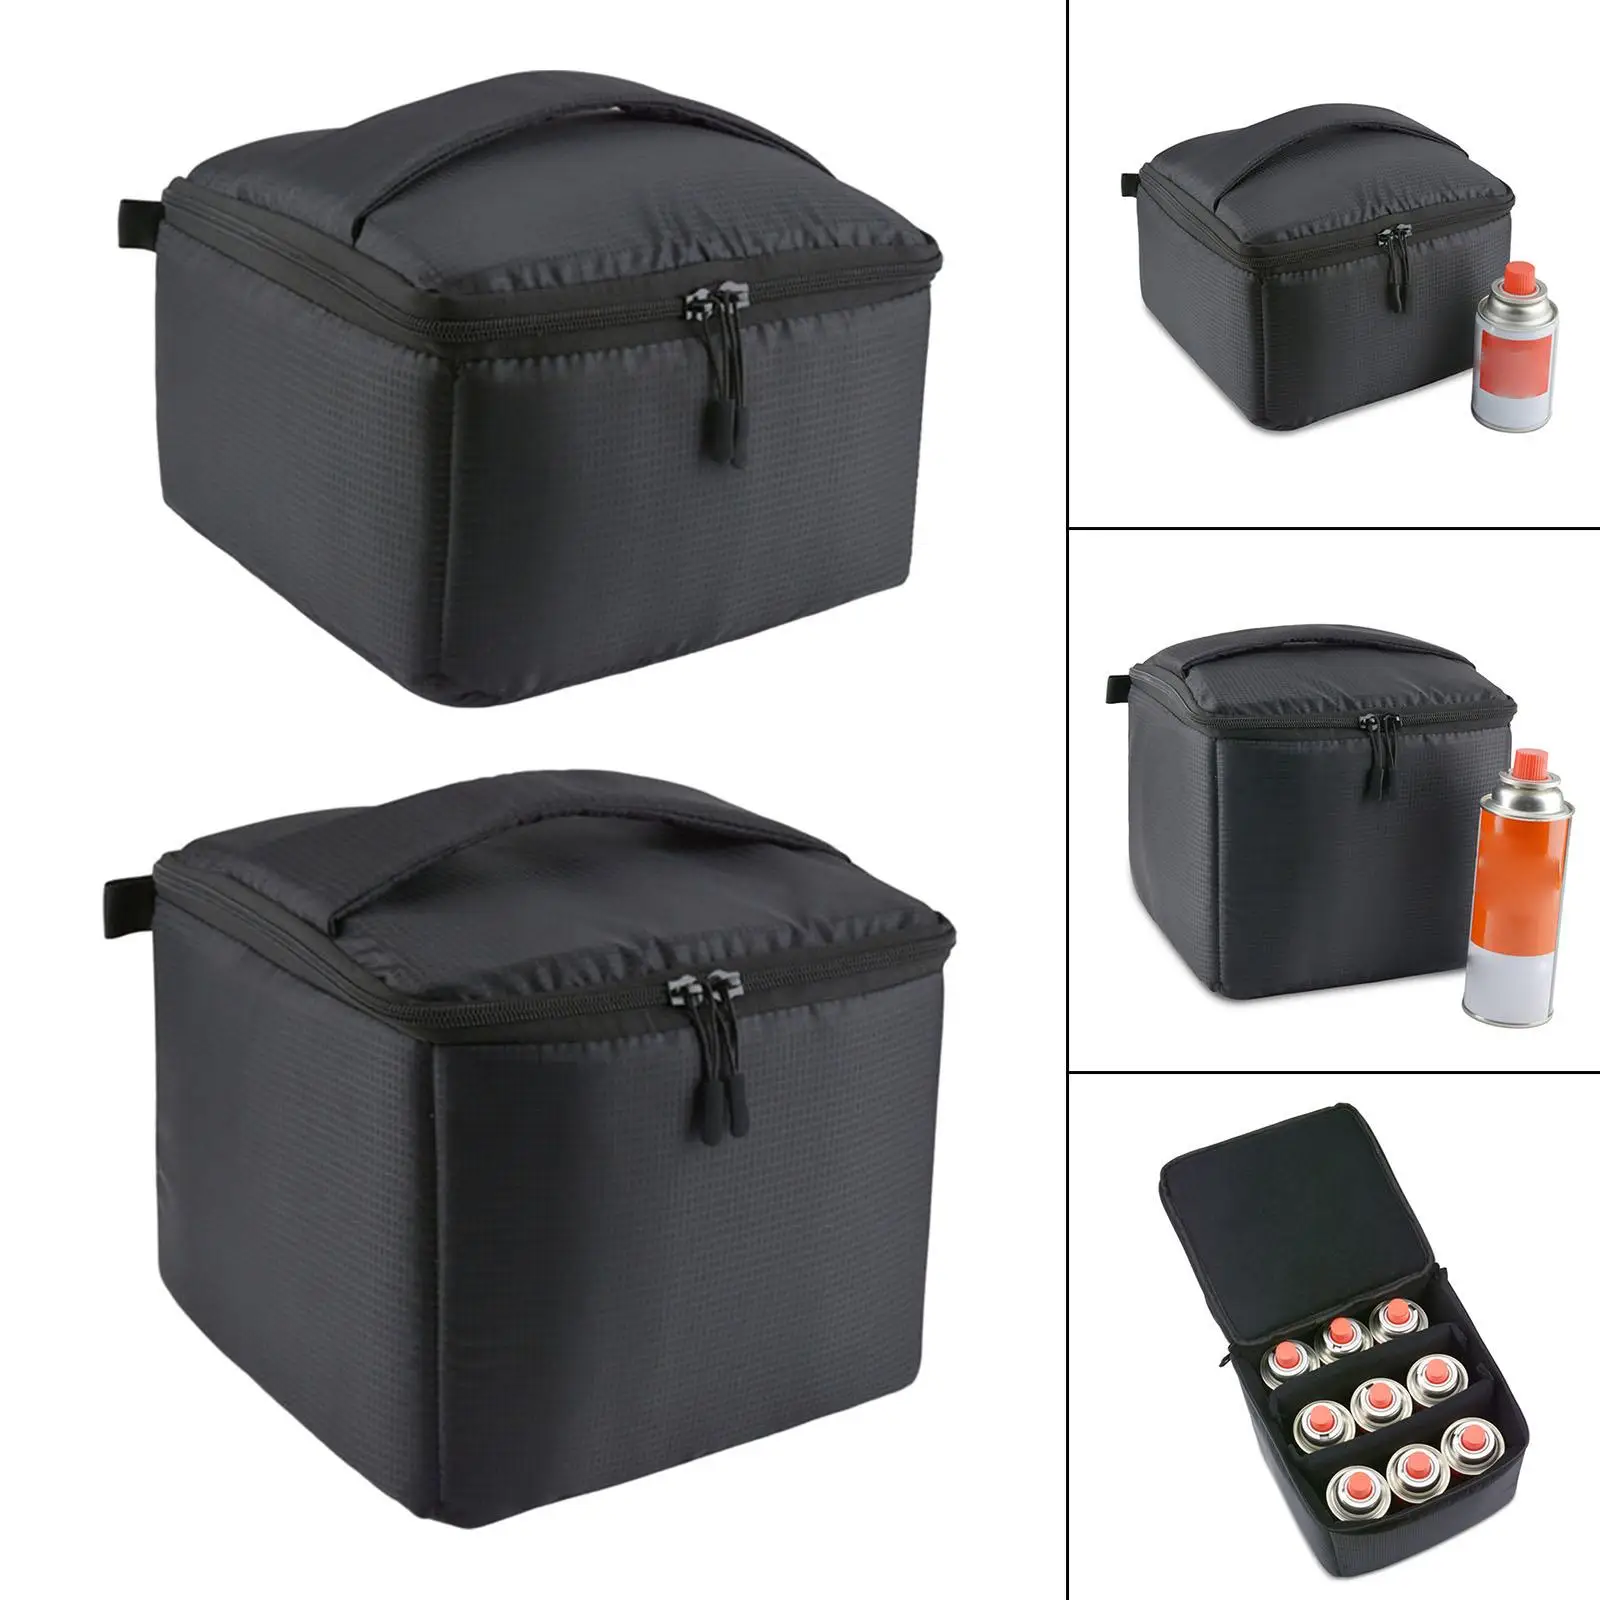 Grill Accessories Bag Camping Organizer Storage Bag for Fishing